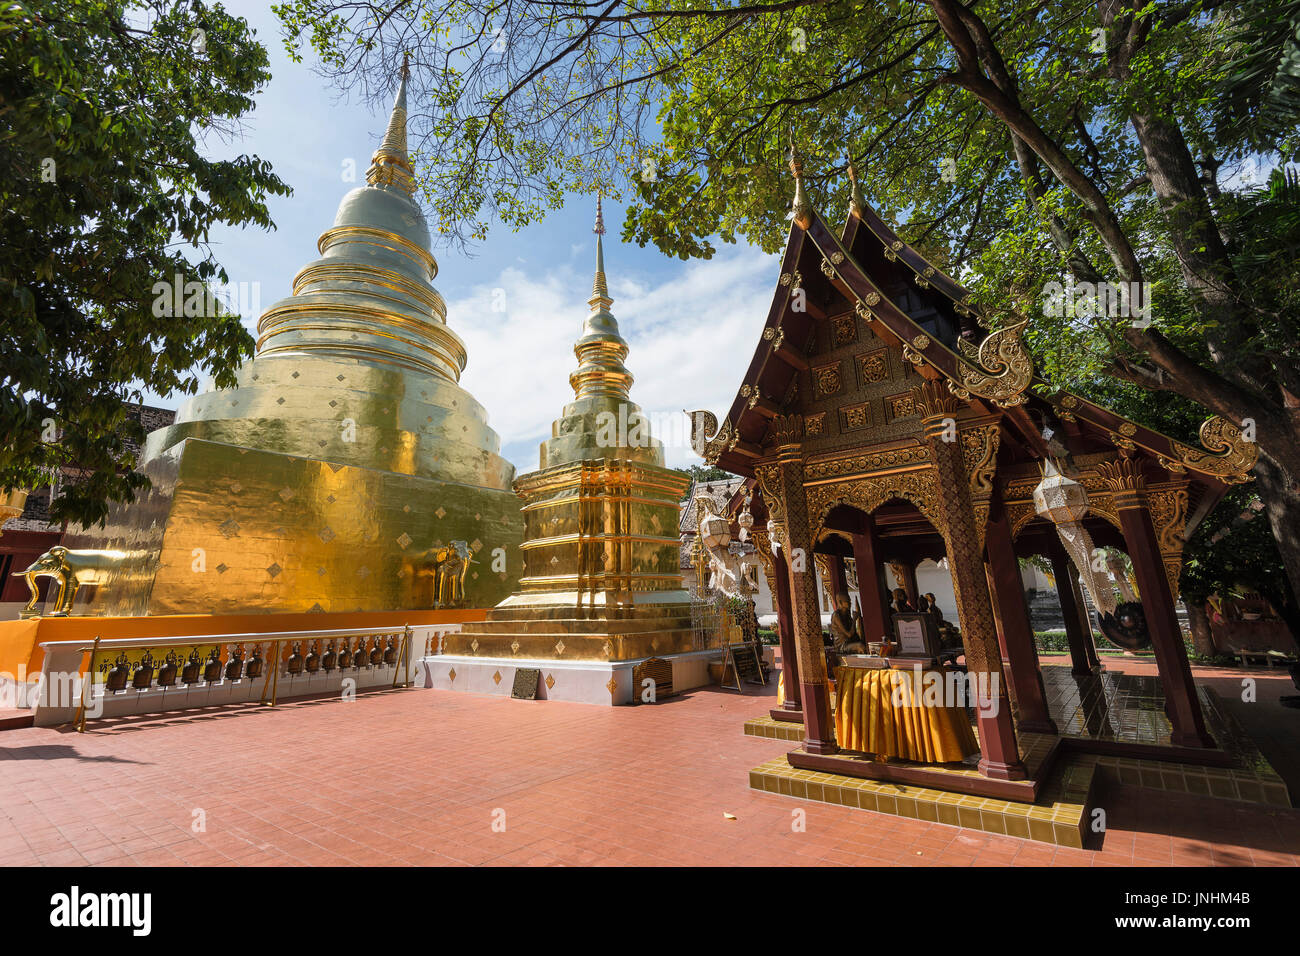 Wat Phra Singh, a Buddhist temple in Chiang Mai, Northern Thailand. Stock Photo